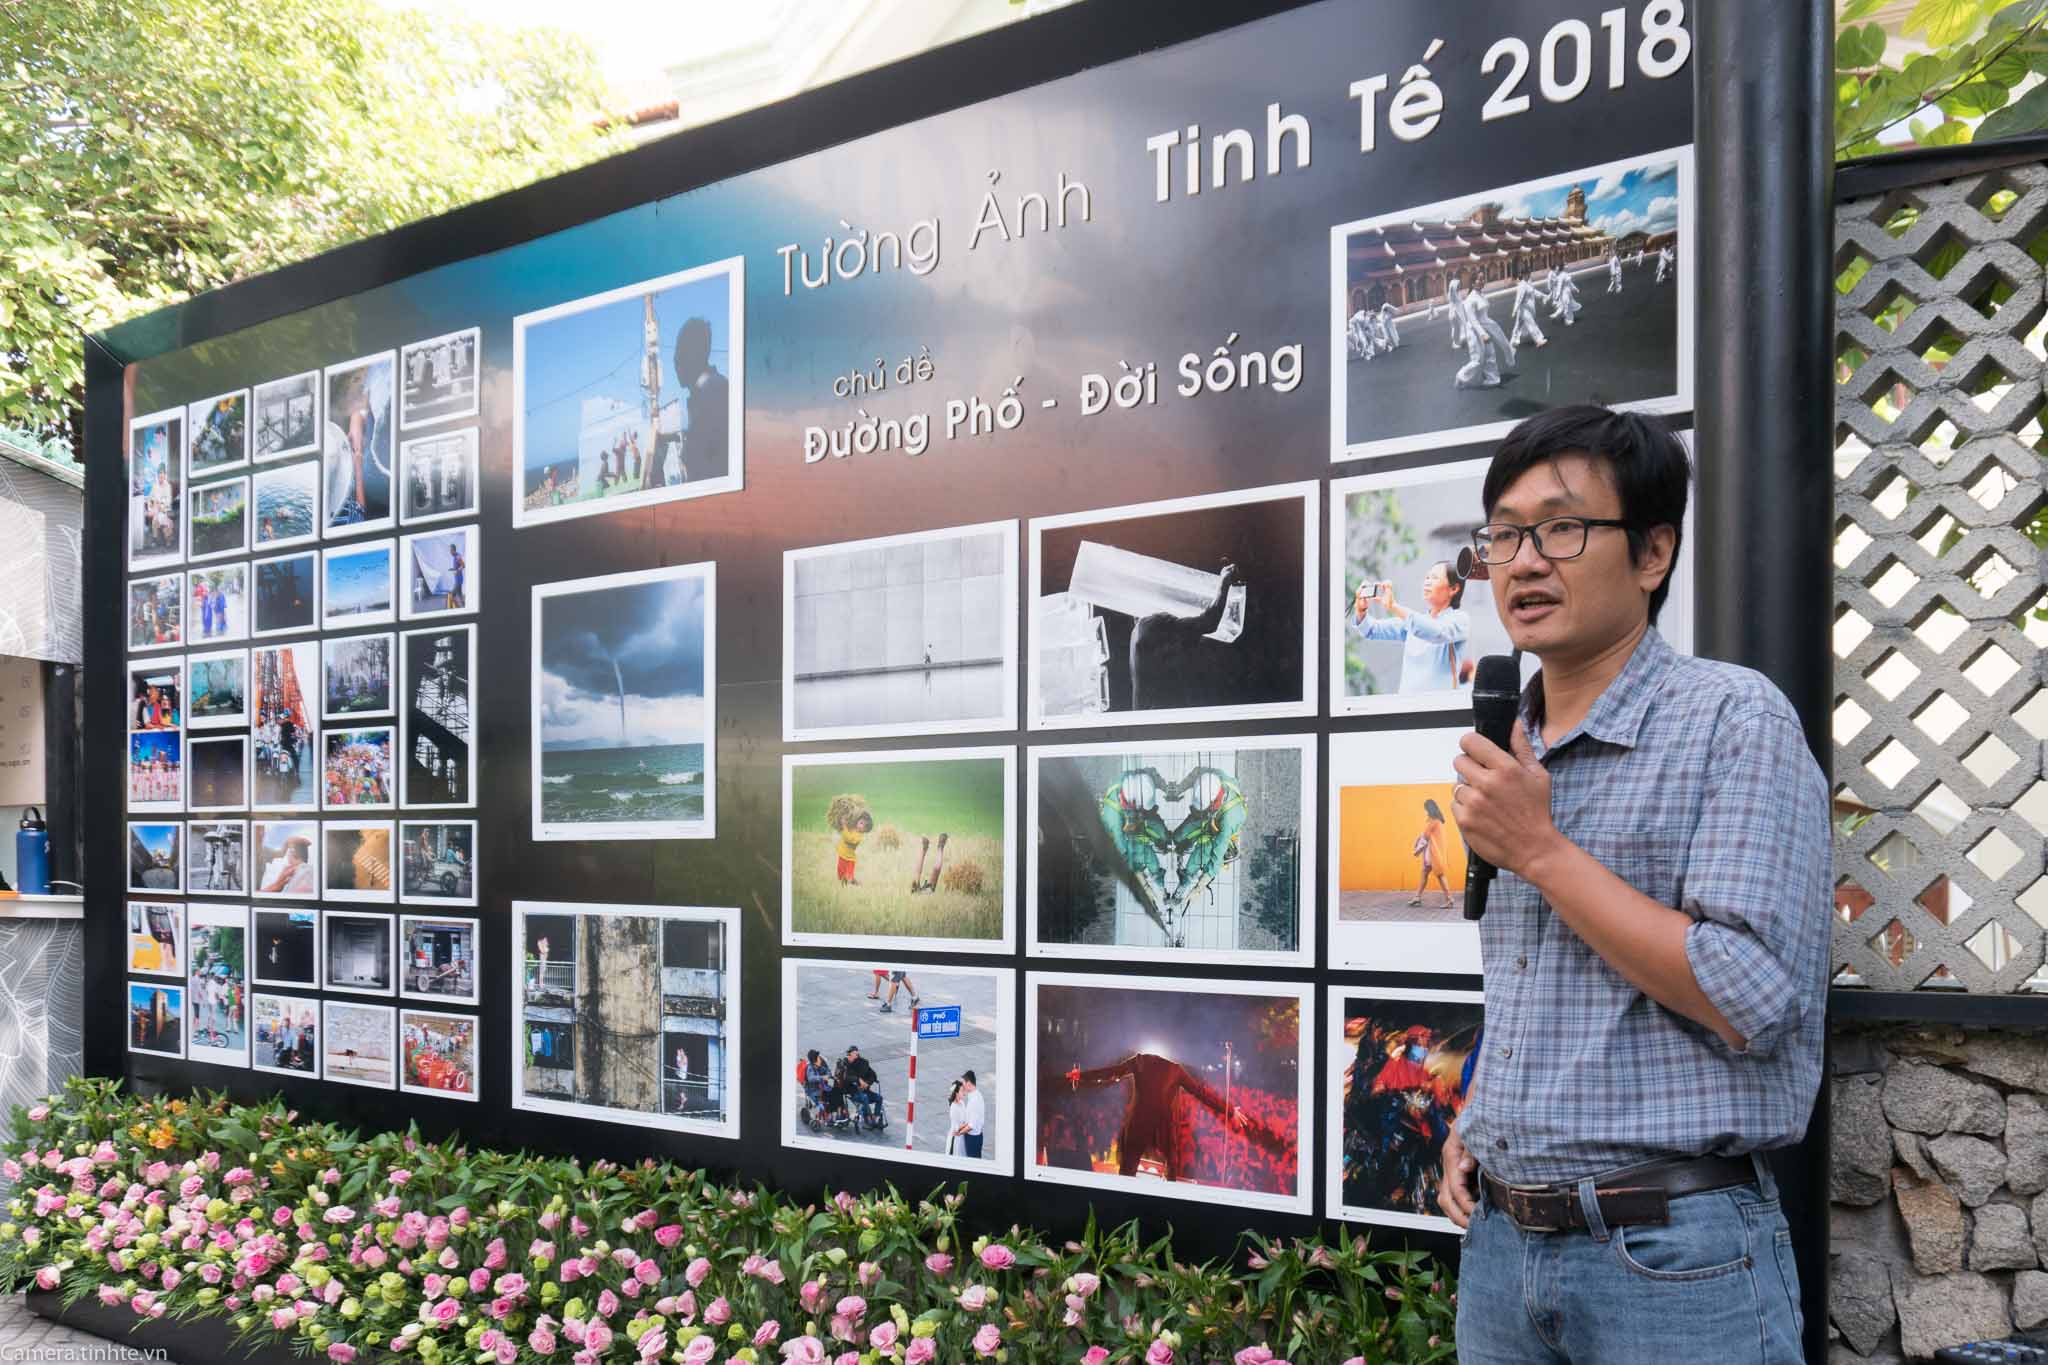 Workshop tuong anh Tinh Te 2018 - Camera.tinhte.vn-6.jpg